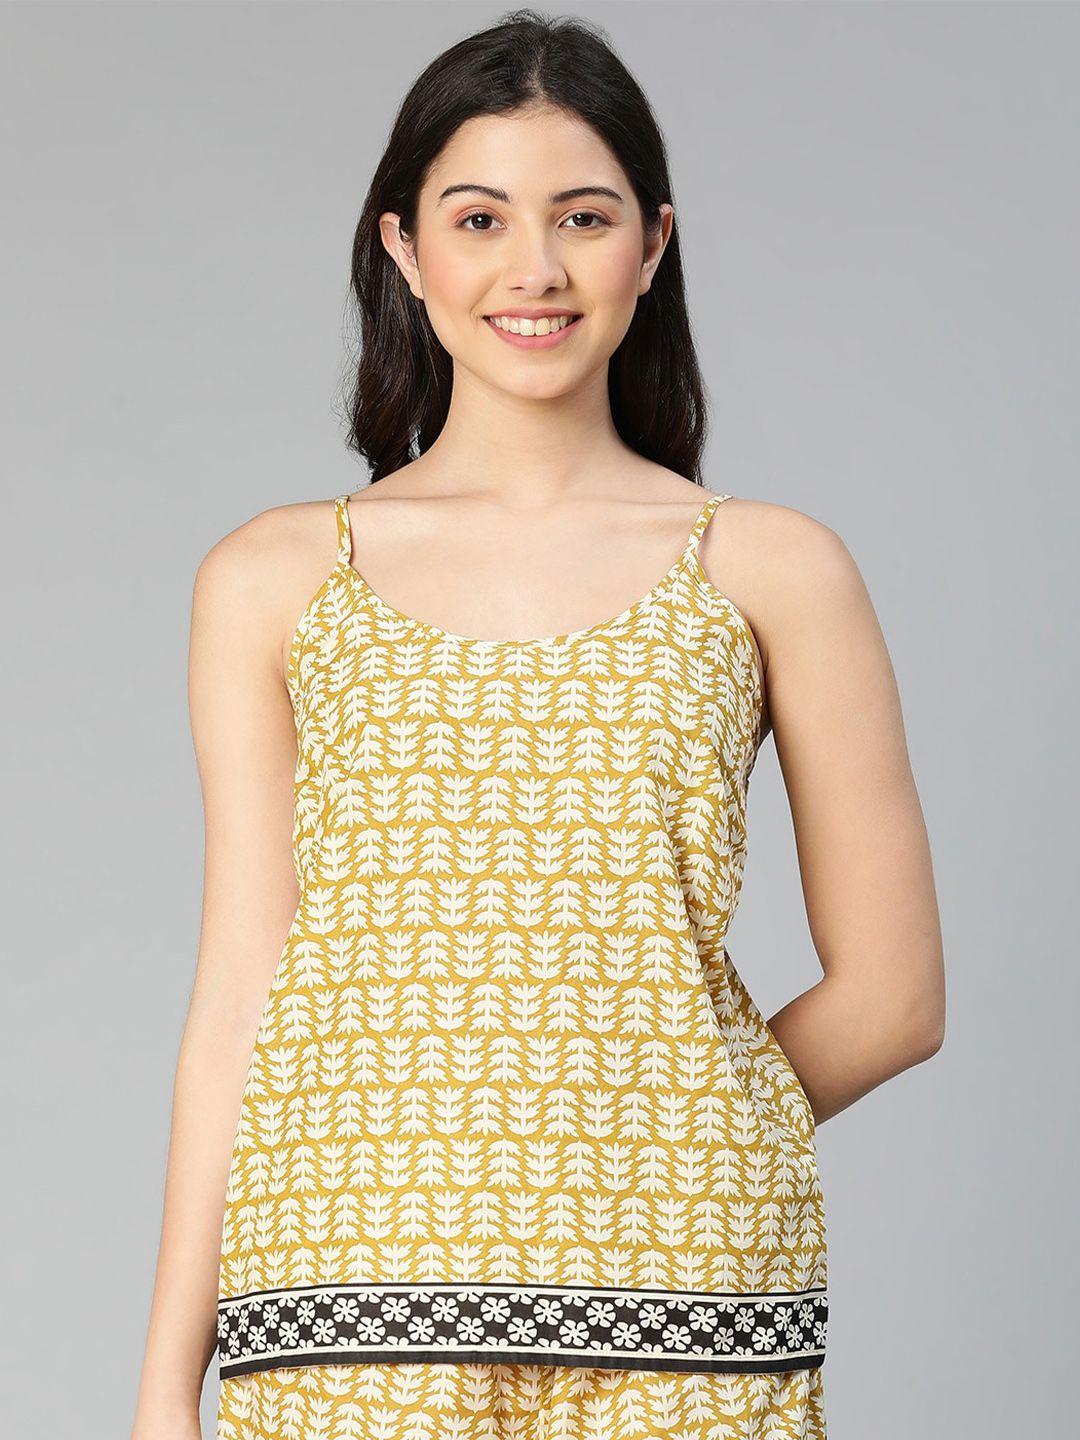 oxolloxo women mustard yellow floral printed cami top